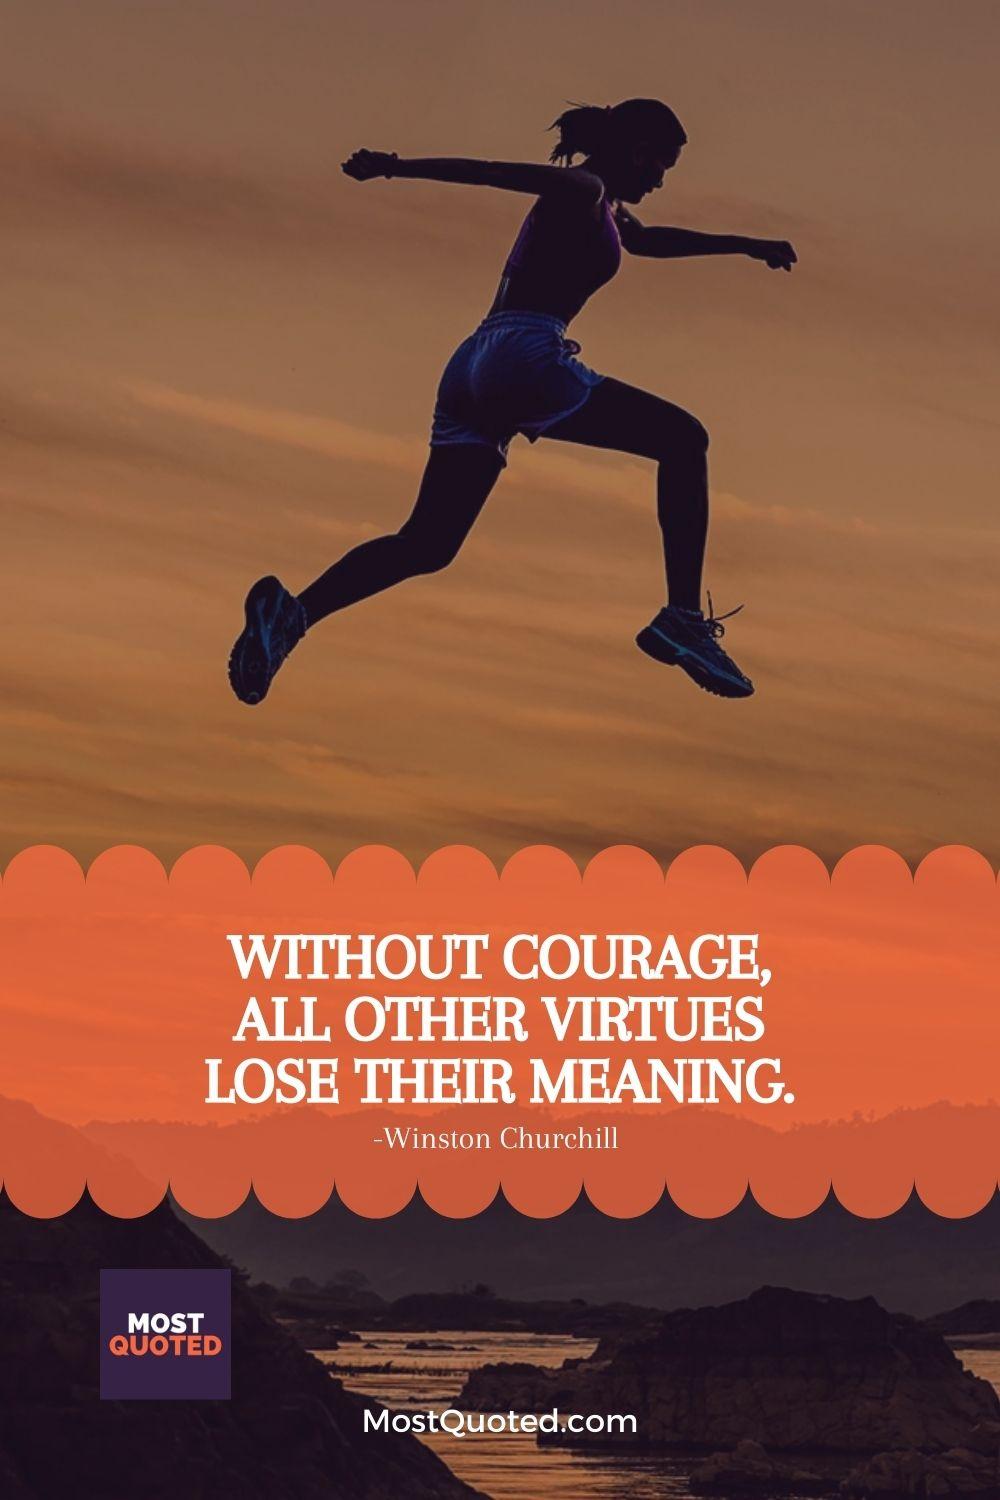 Without courage, all other virtues lose their meaning. - Winston Churchill